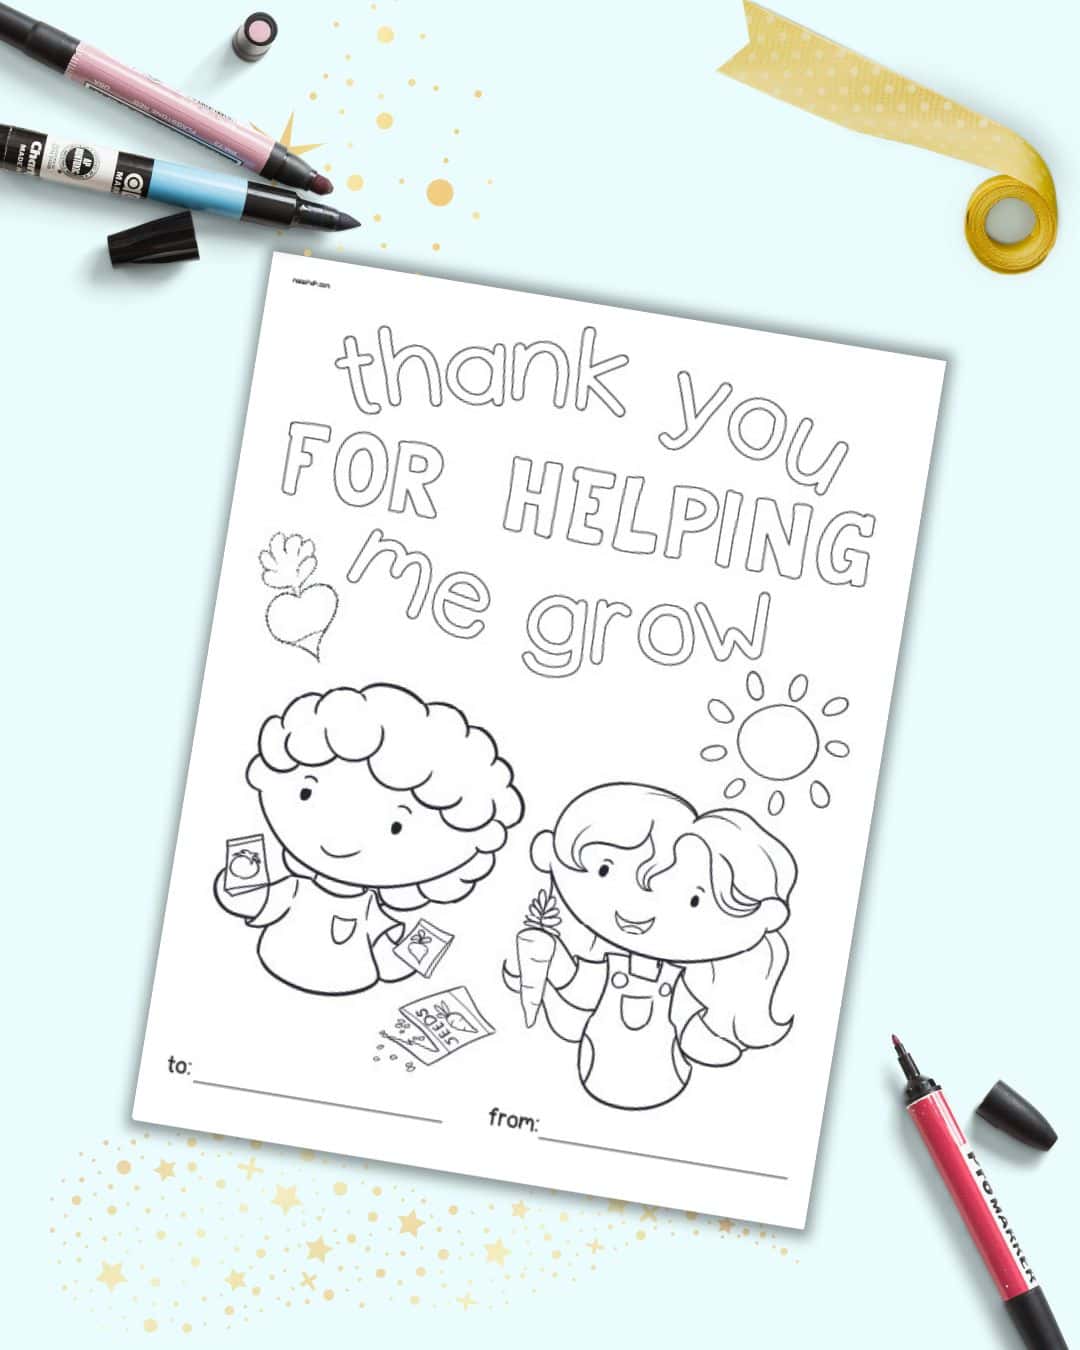 A preview of a coloring page with teh text "thank you for helping me grow!"